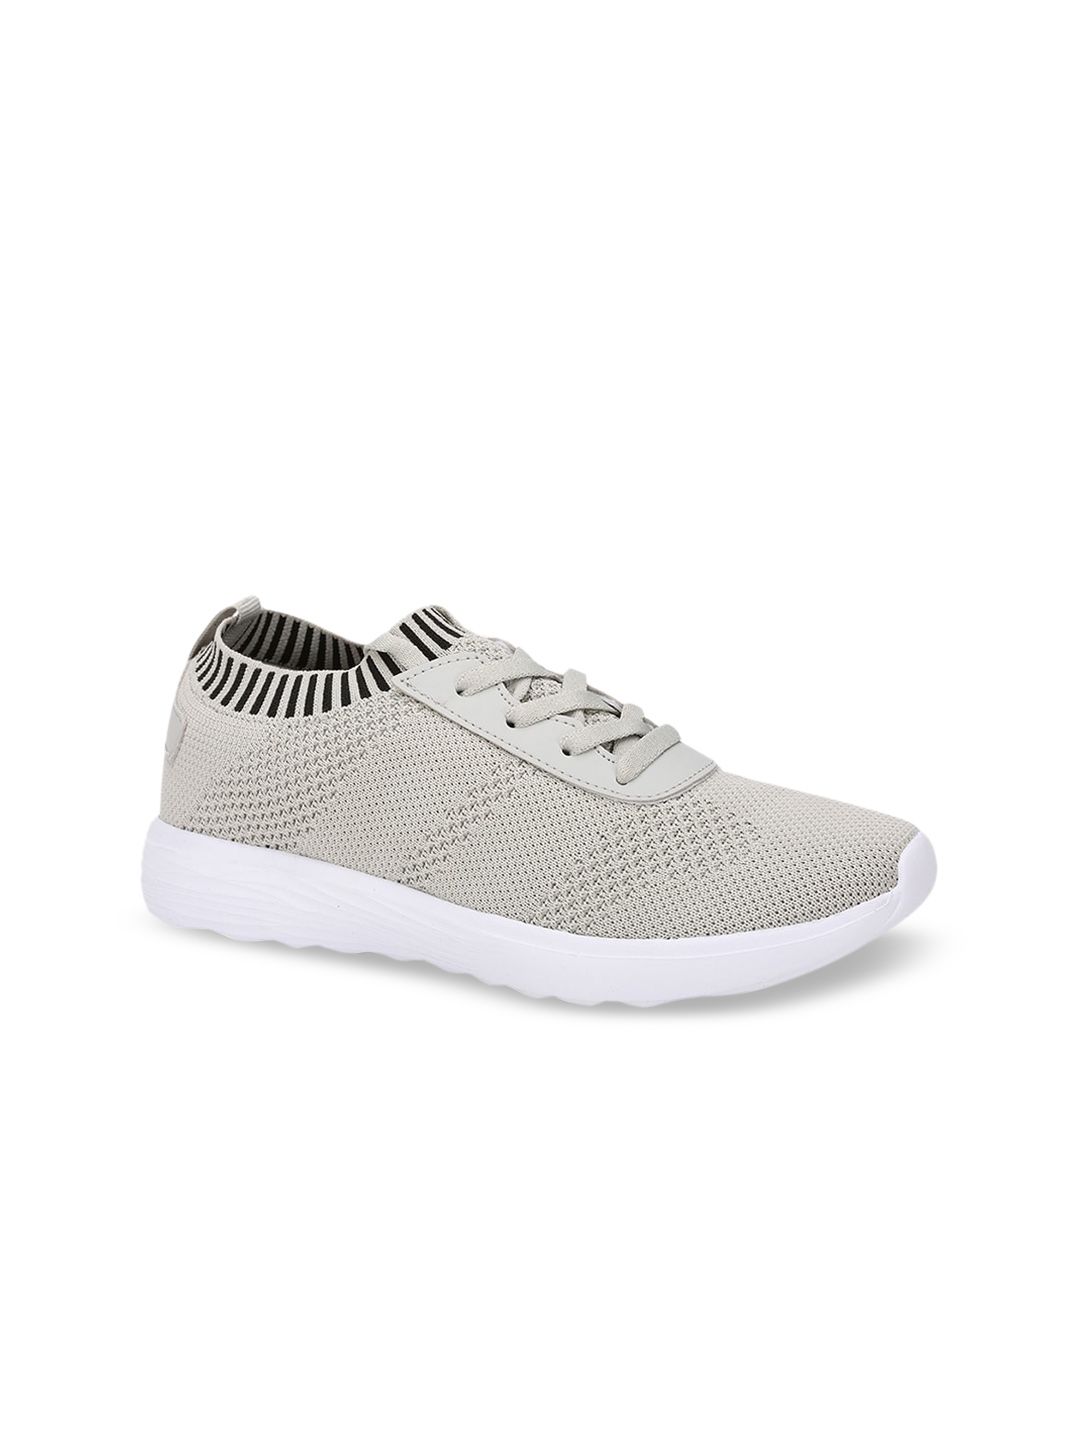 North Star Women Grey Woven Design Sneakers Price in India